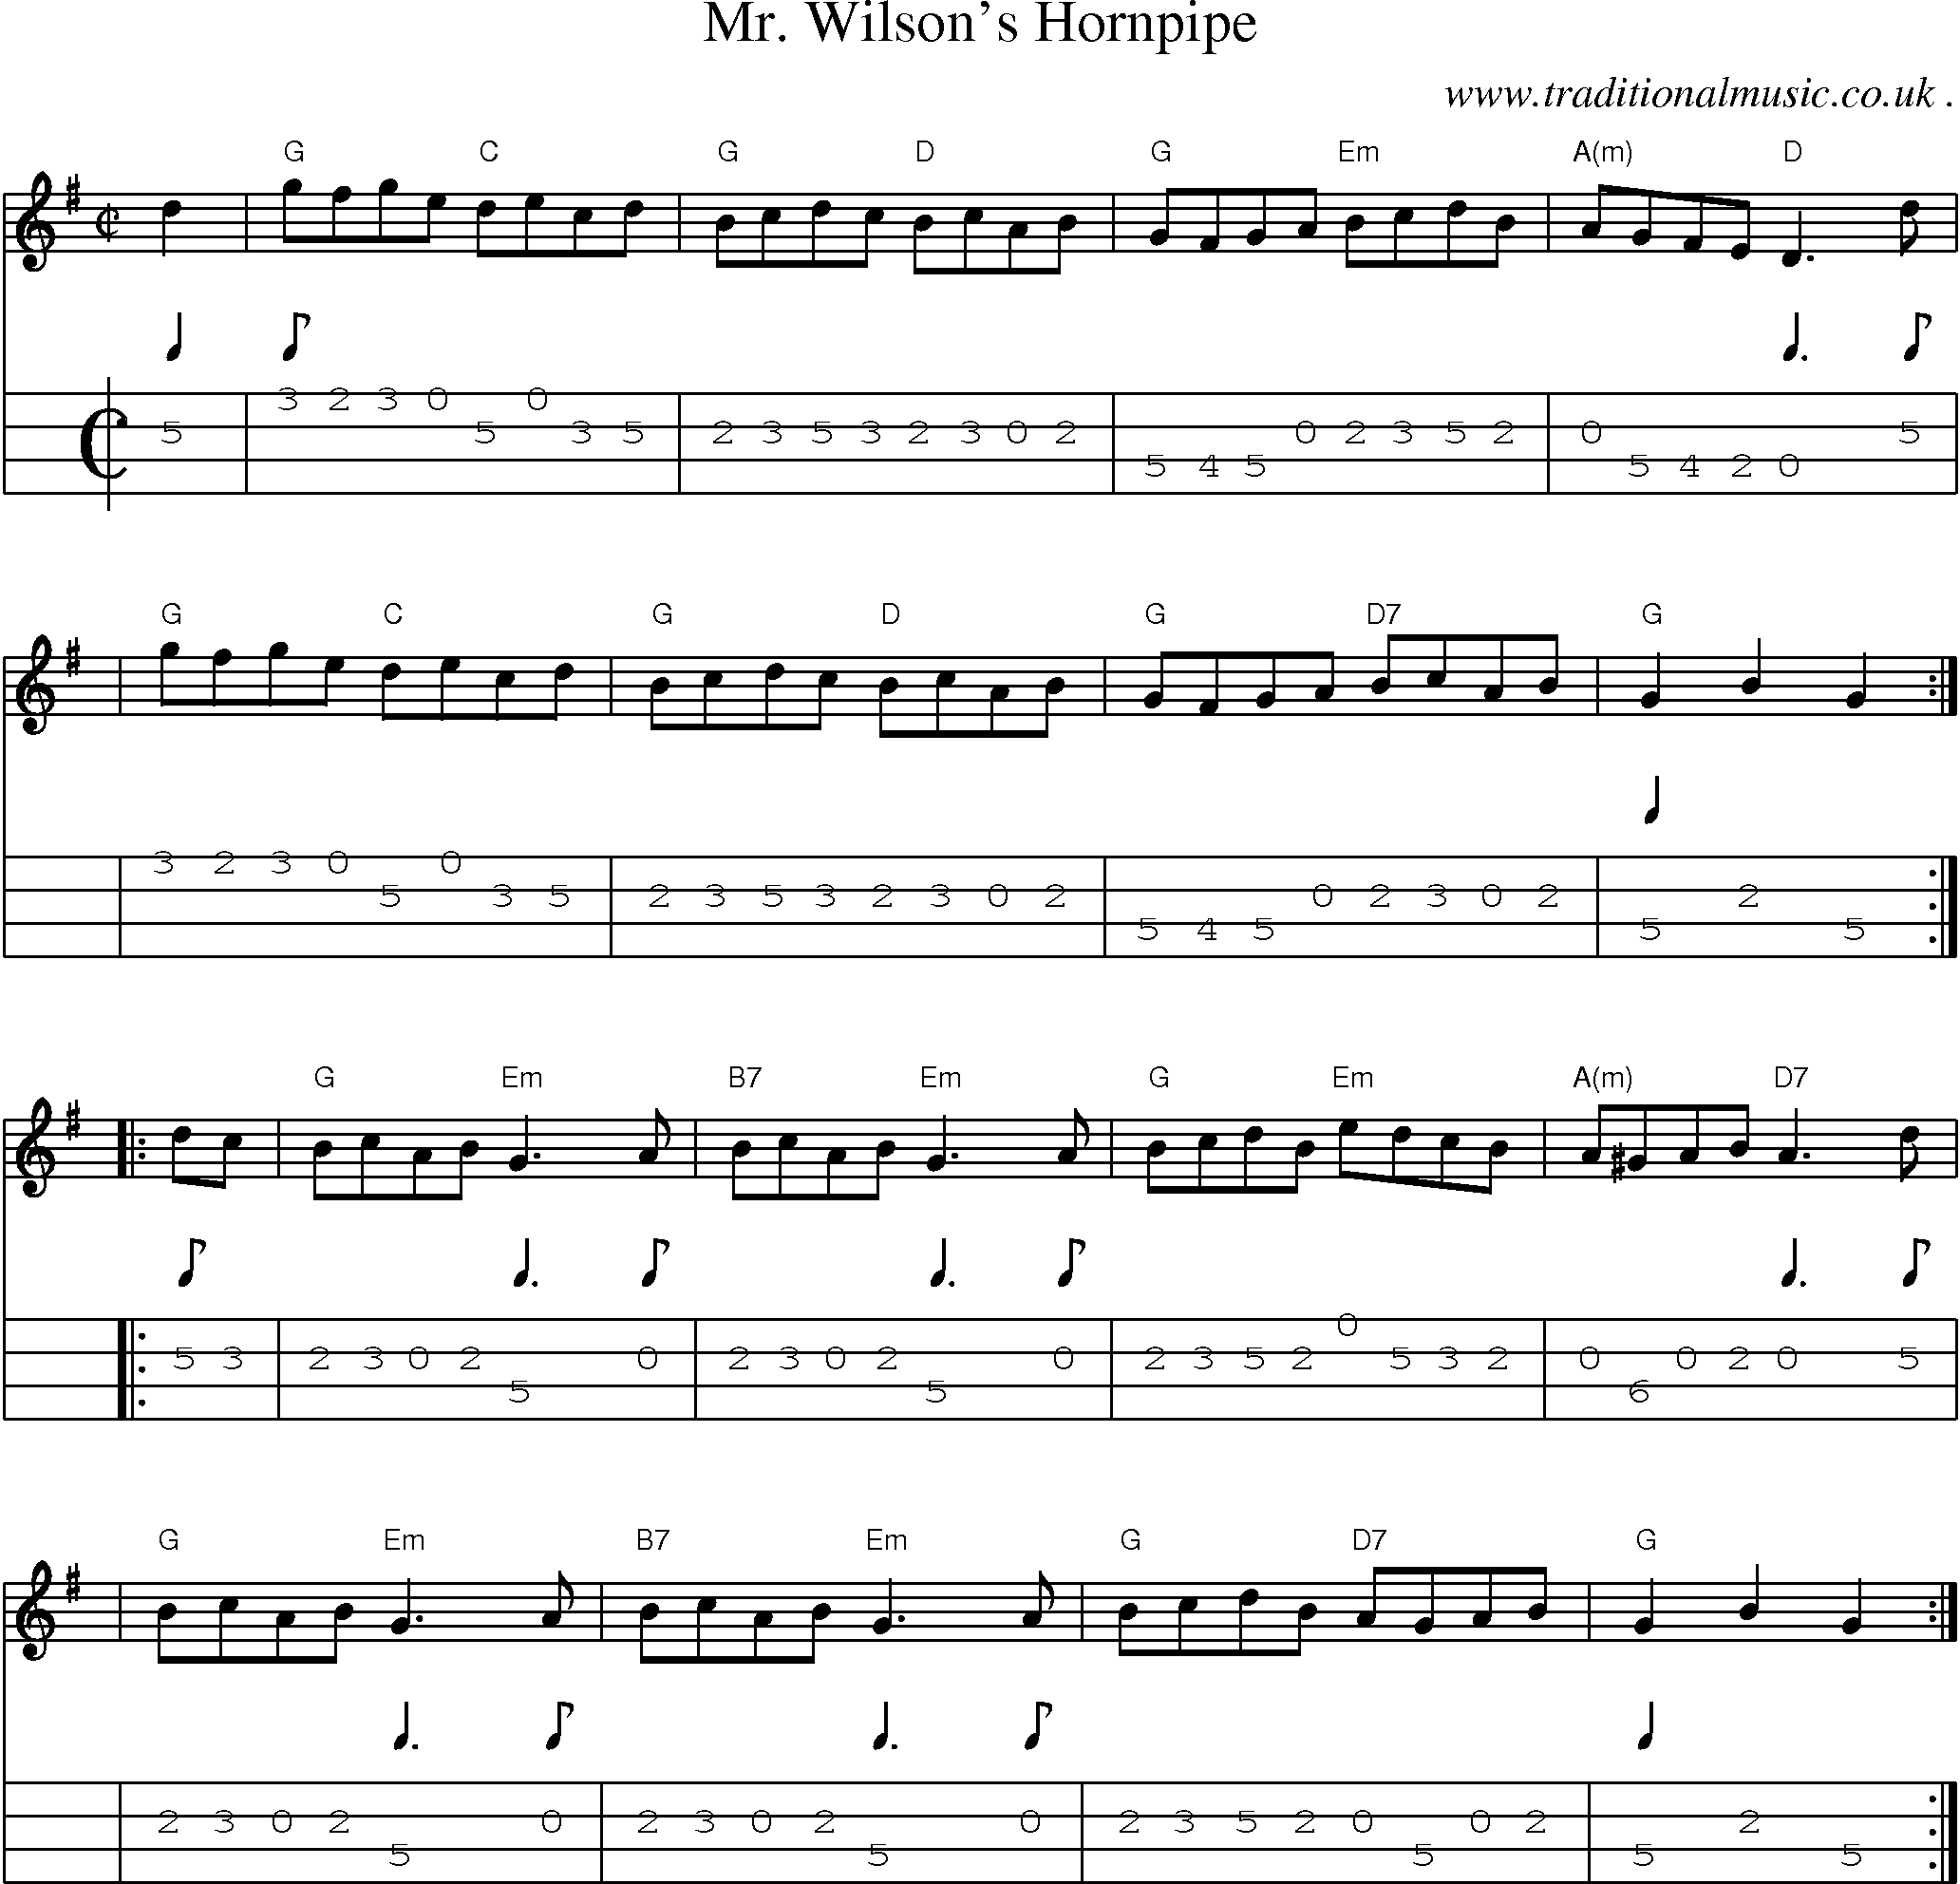 Sheet-music  score, Chords and Mandolin Tabs for Mr Wilsons Hornpipe